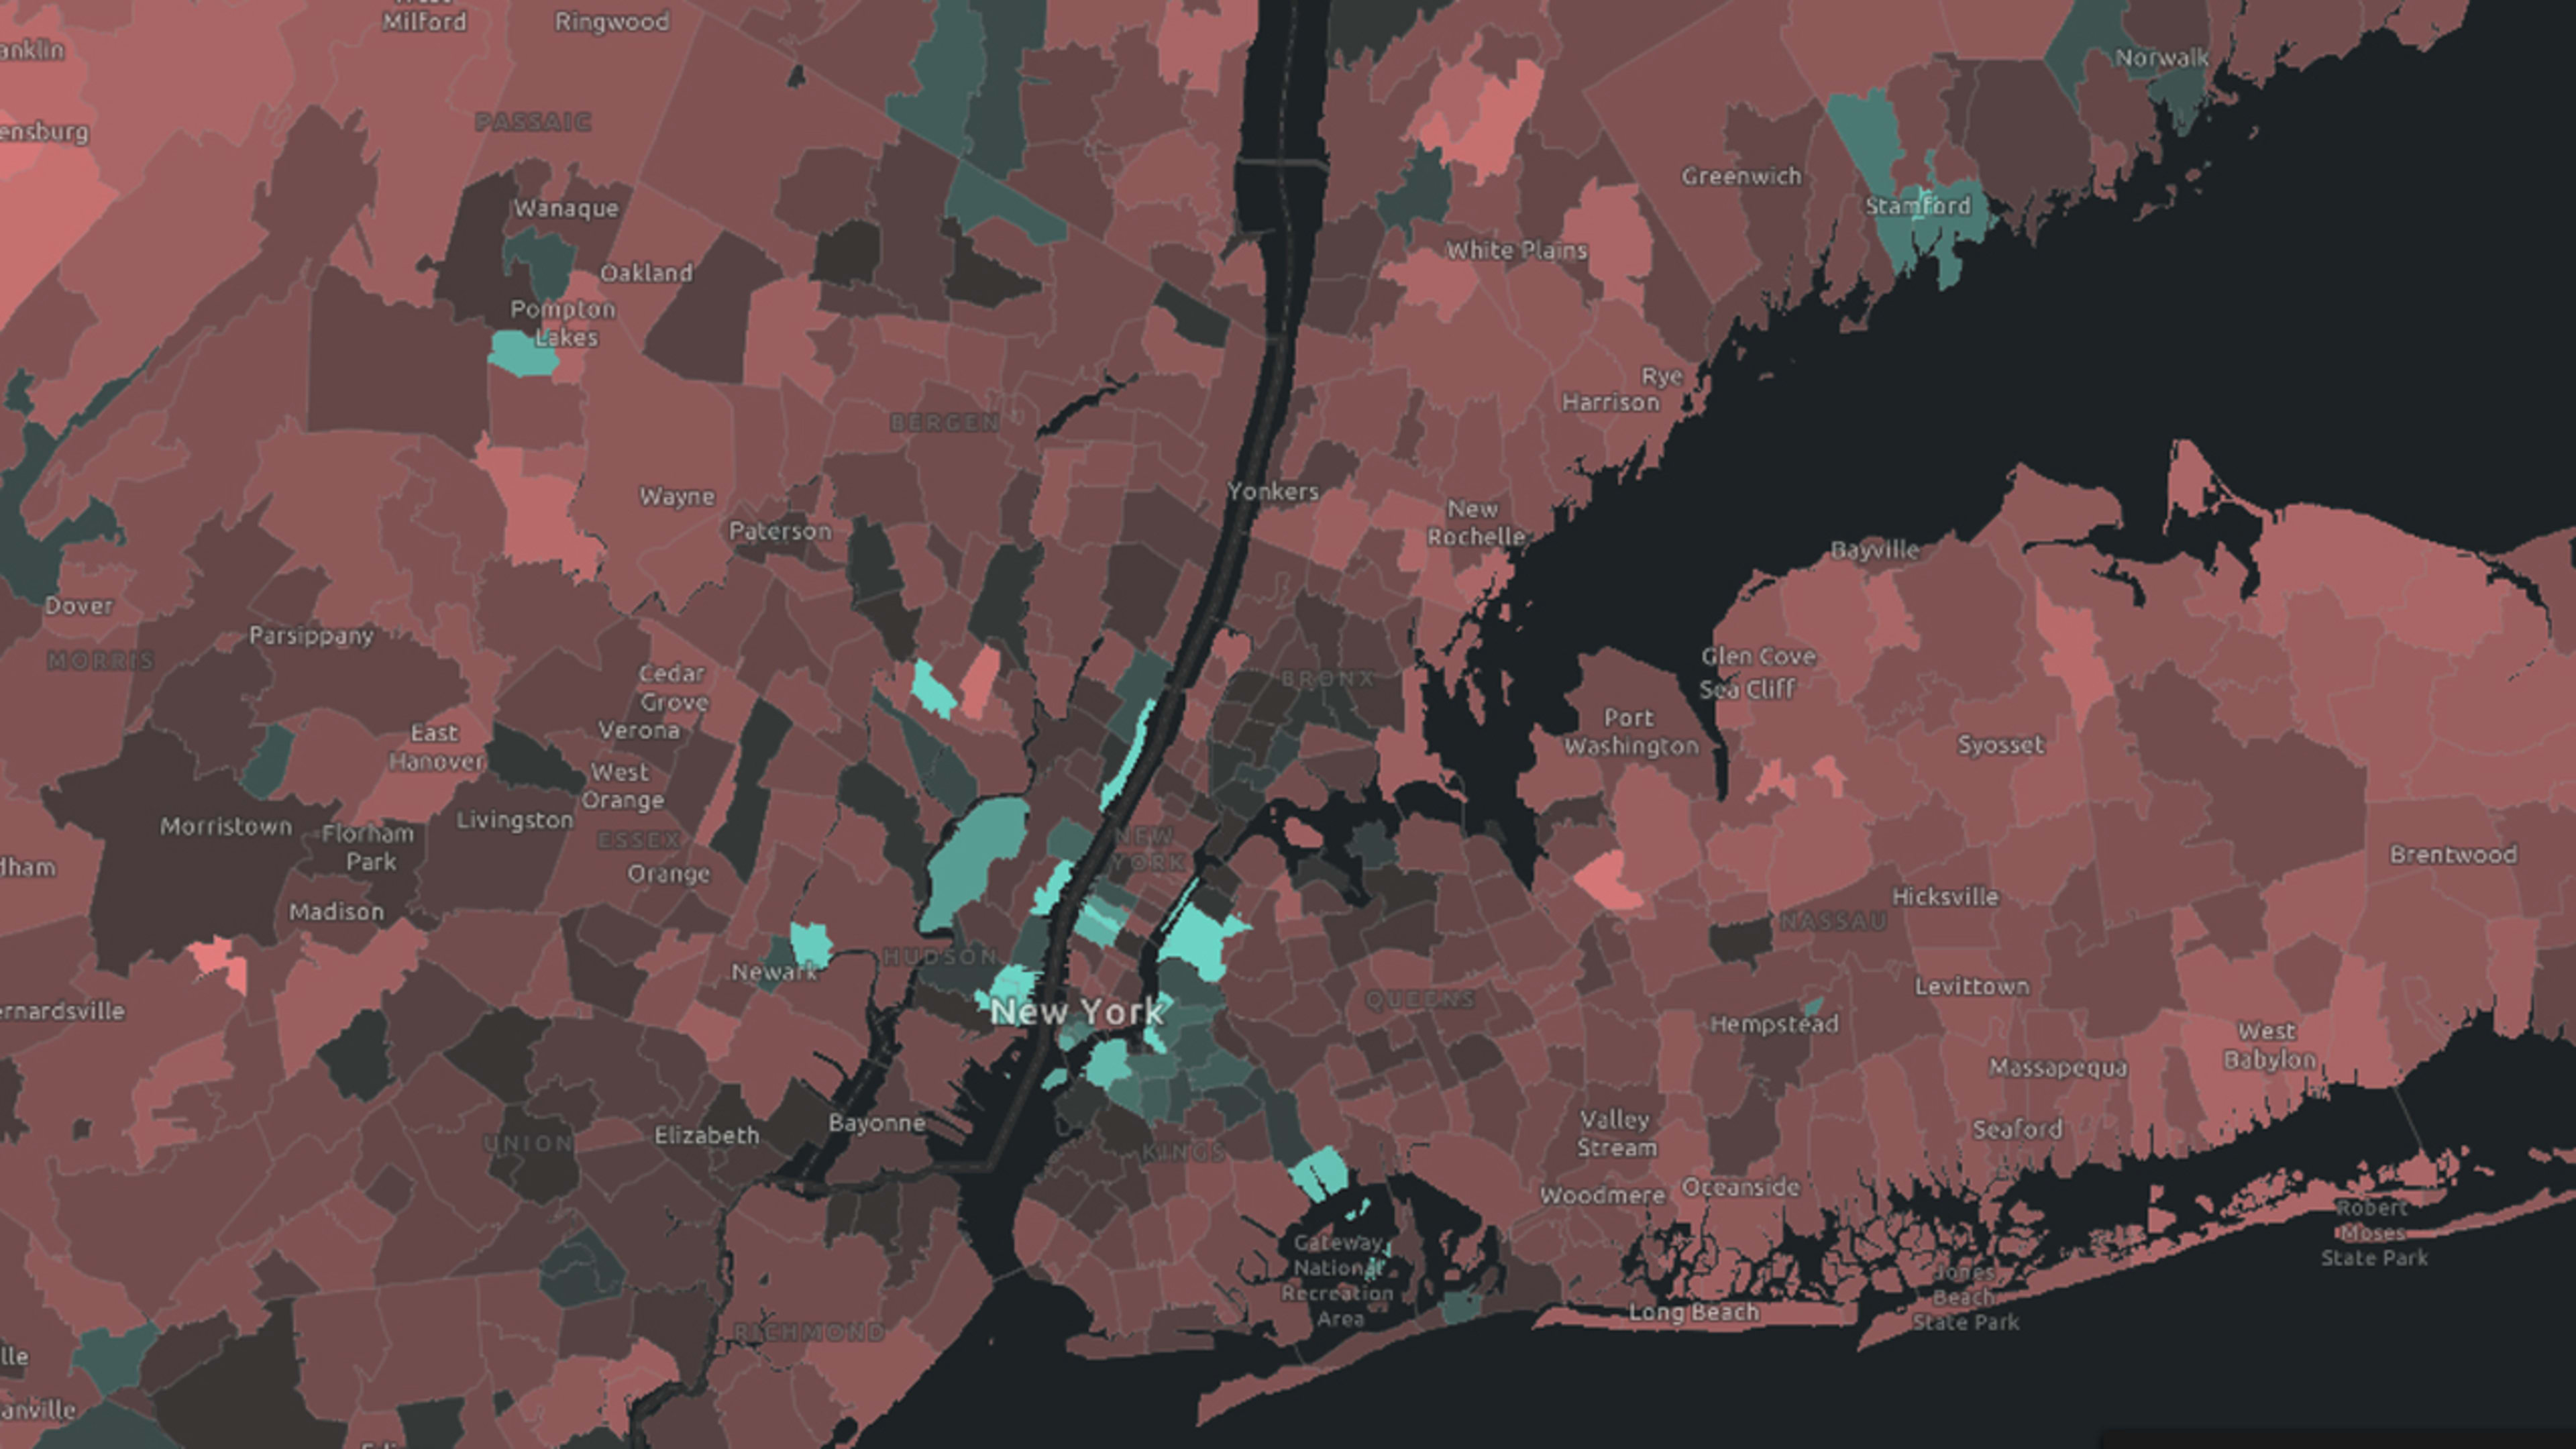 This map stunningly visualizes a decade of U.S. population growth, from 2010-2019